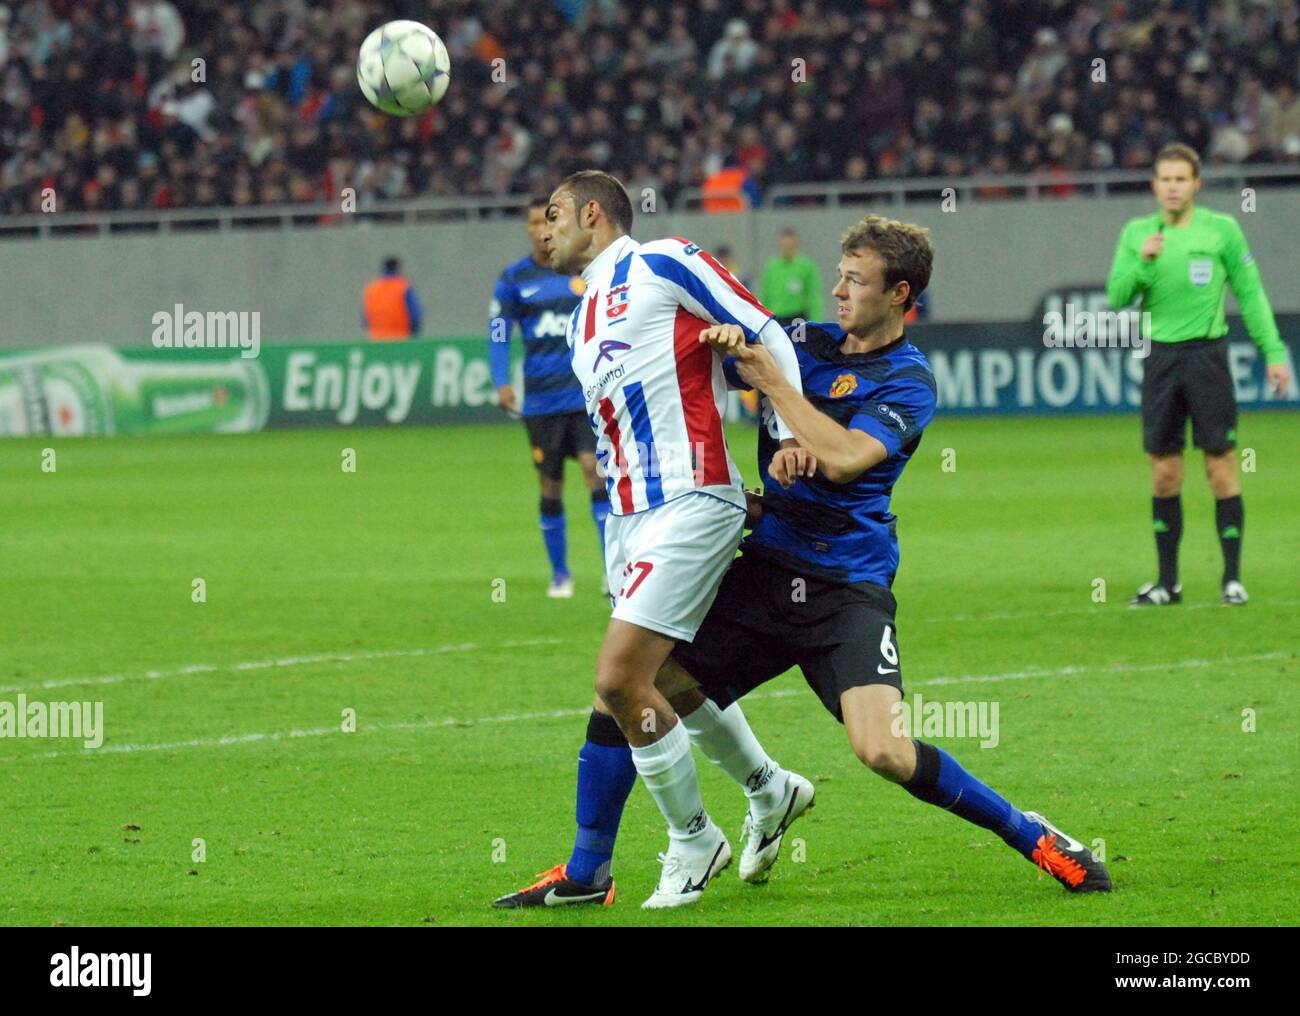 BUCHAREST, ROMANIA - OCTOBER 18, 2011: Marius Pena (L) of Otelul and Jonny Evans (R) of Manchester pictured during the UEFA Champions League Group C game between Otelul Galati and Manchester United at National Arena. Stock Photo